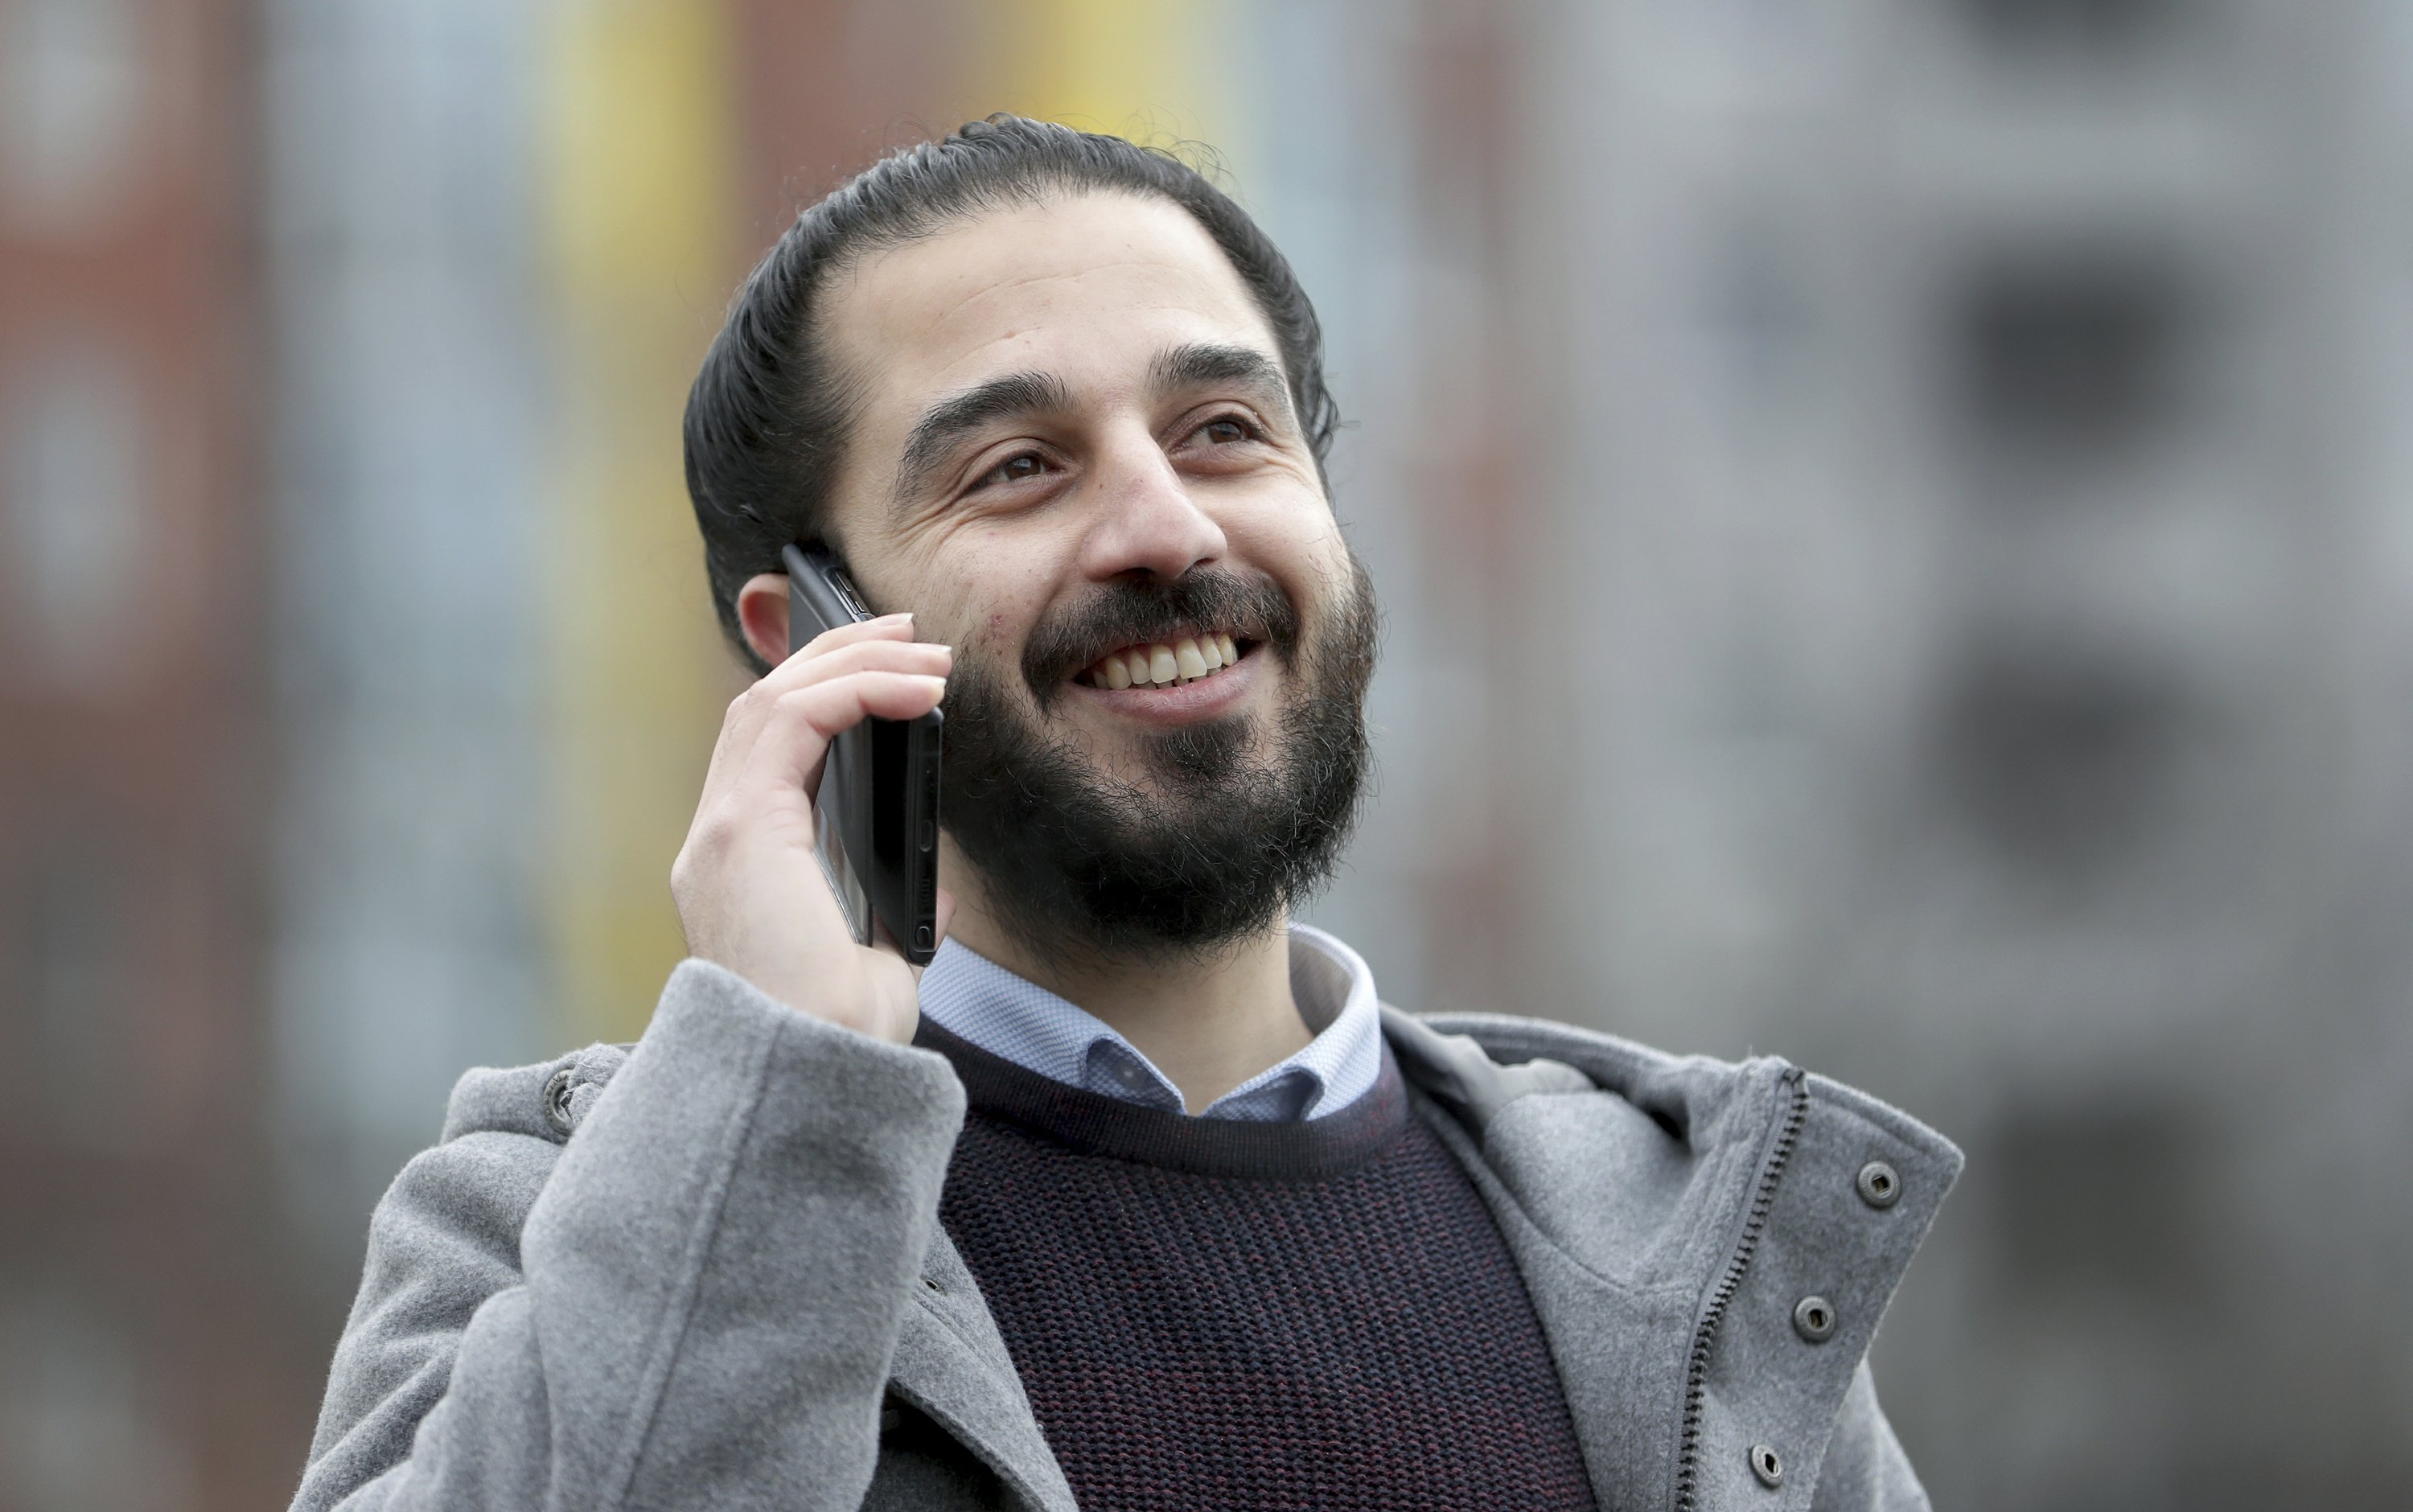 The Syrian who fled to Germany 5 years ago is running for parliament